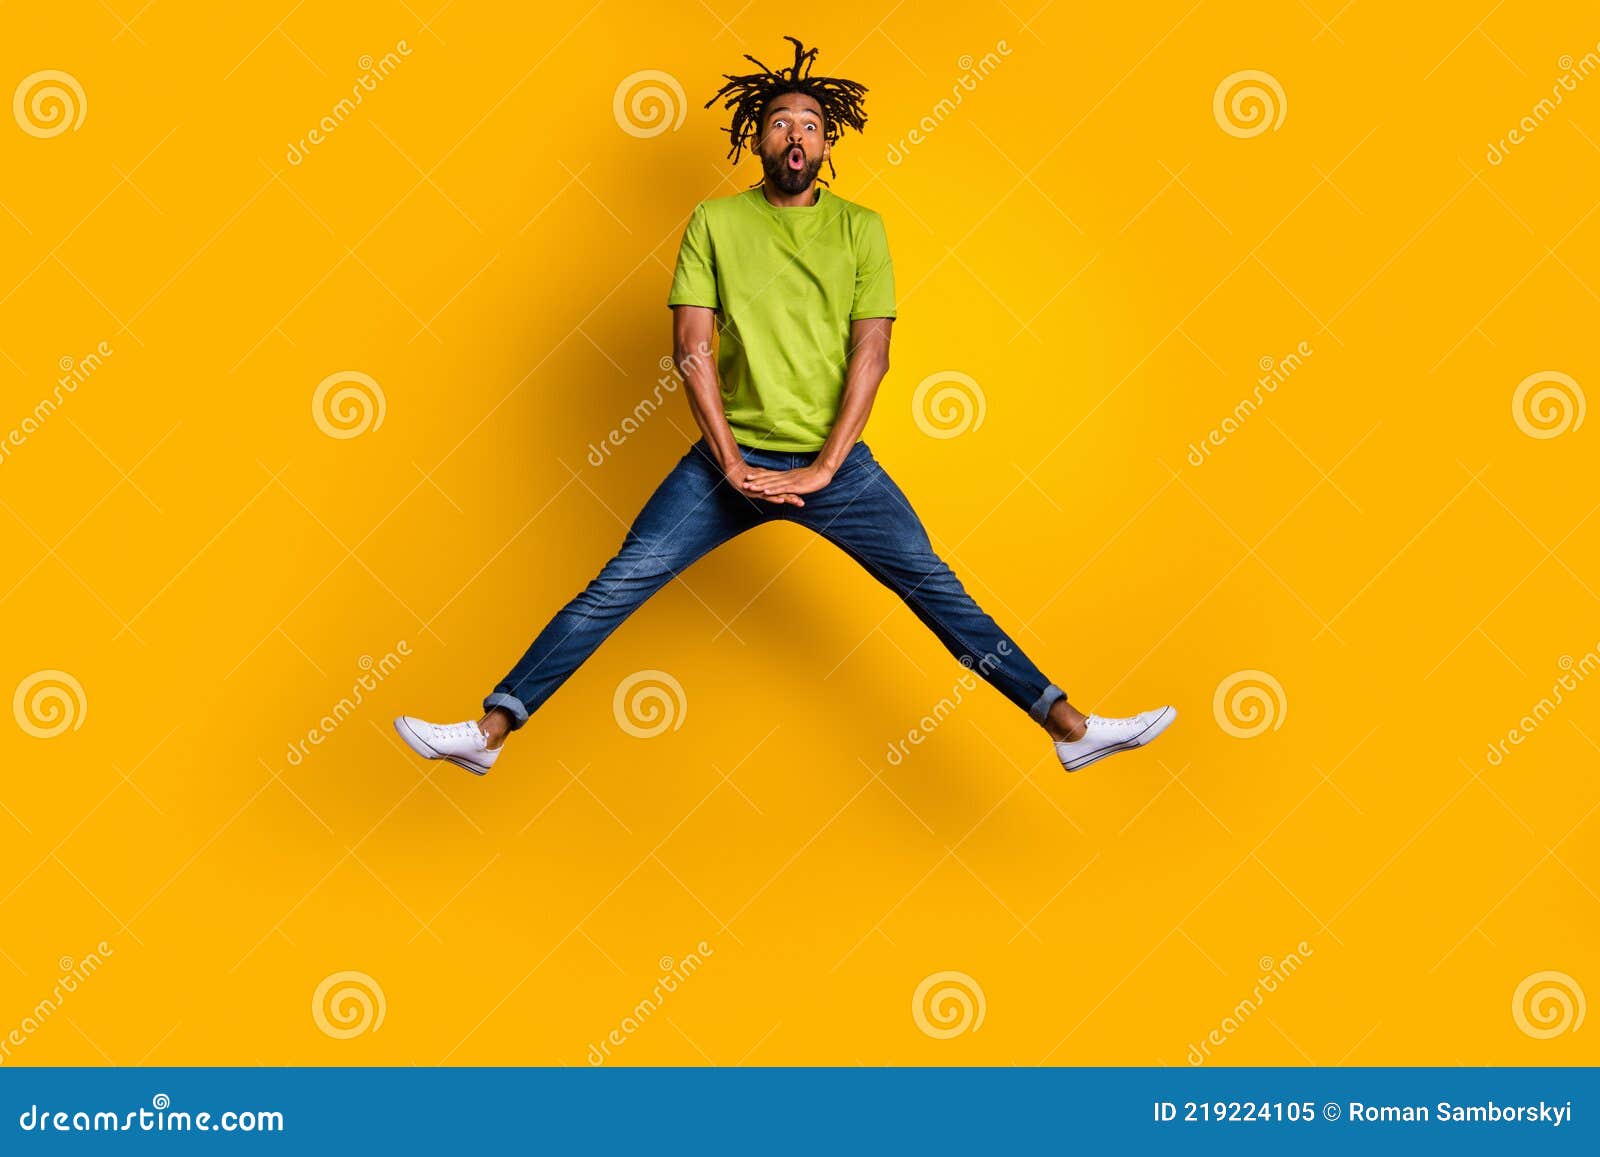 Photo Portrait Full Body View Of Shocked Man Jumping Up Spreading Legs